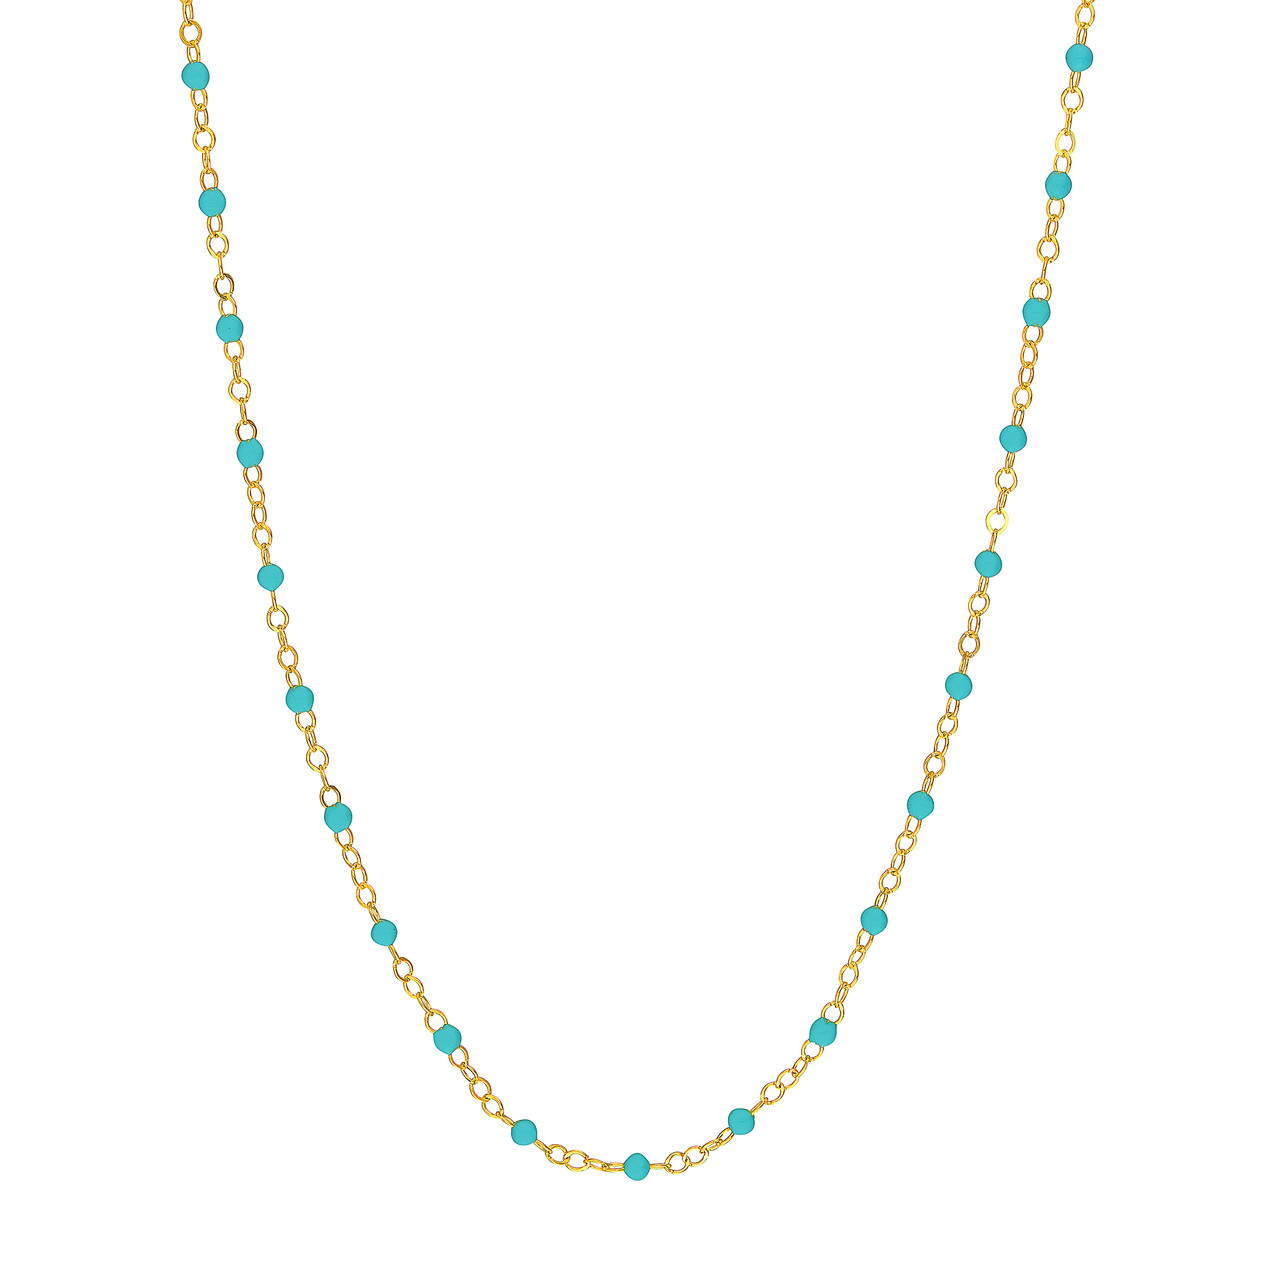 Yellow Gold Turquoise Enamel Bead Chain Necklace l 18 inches